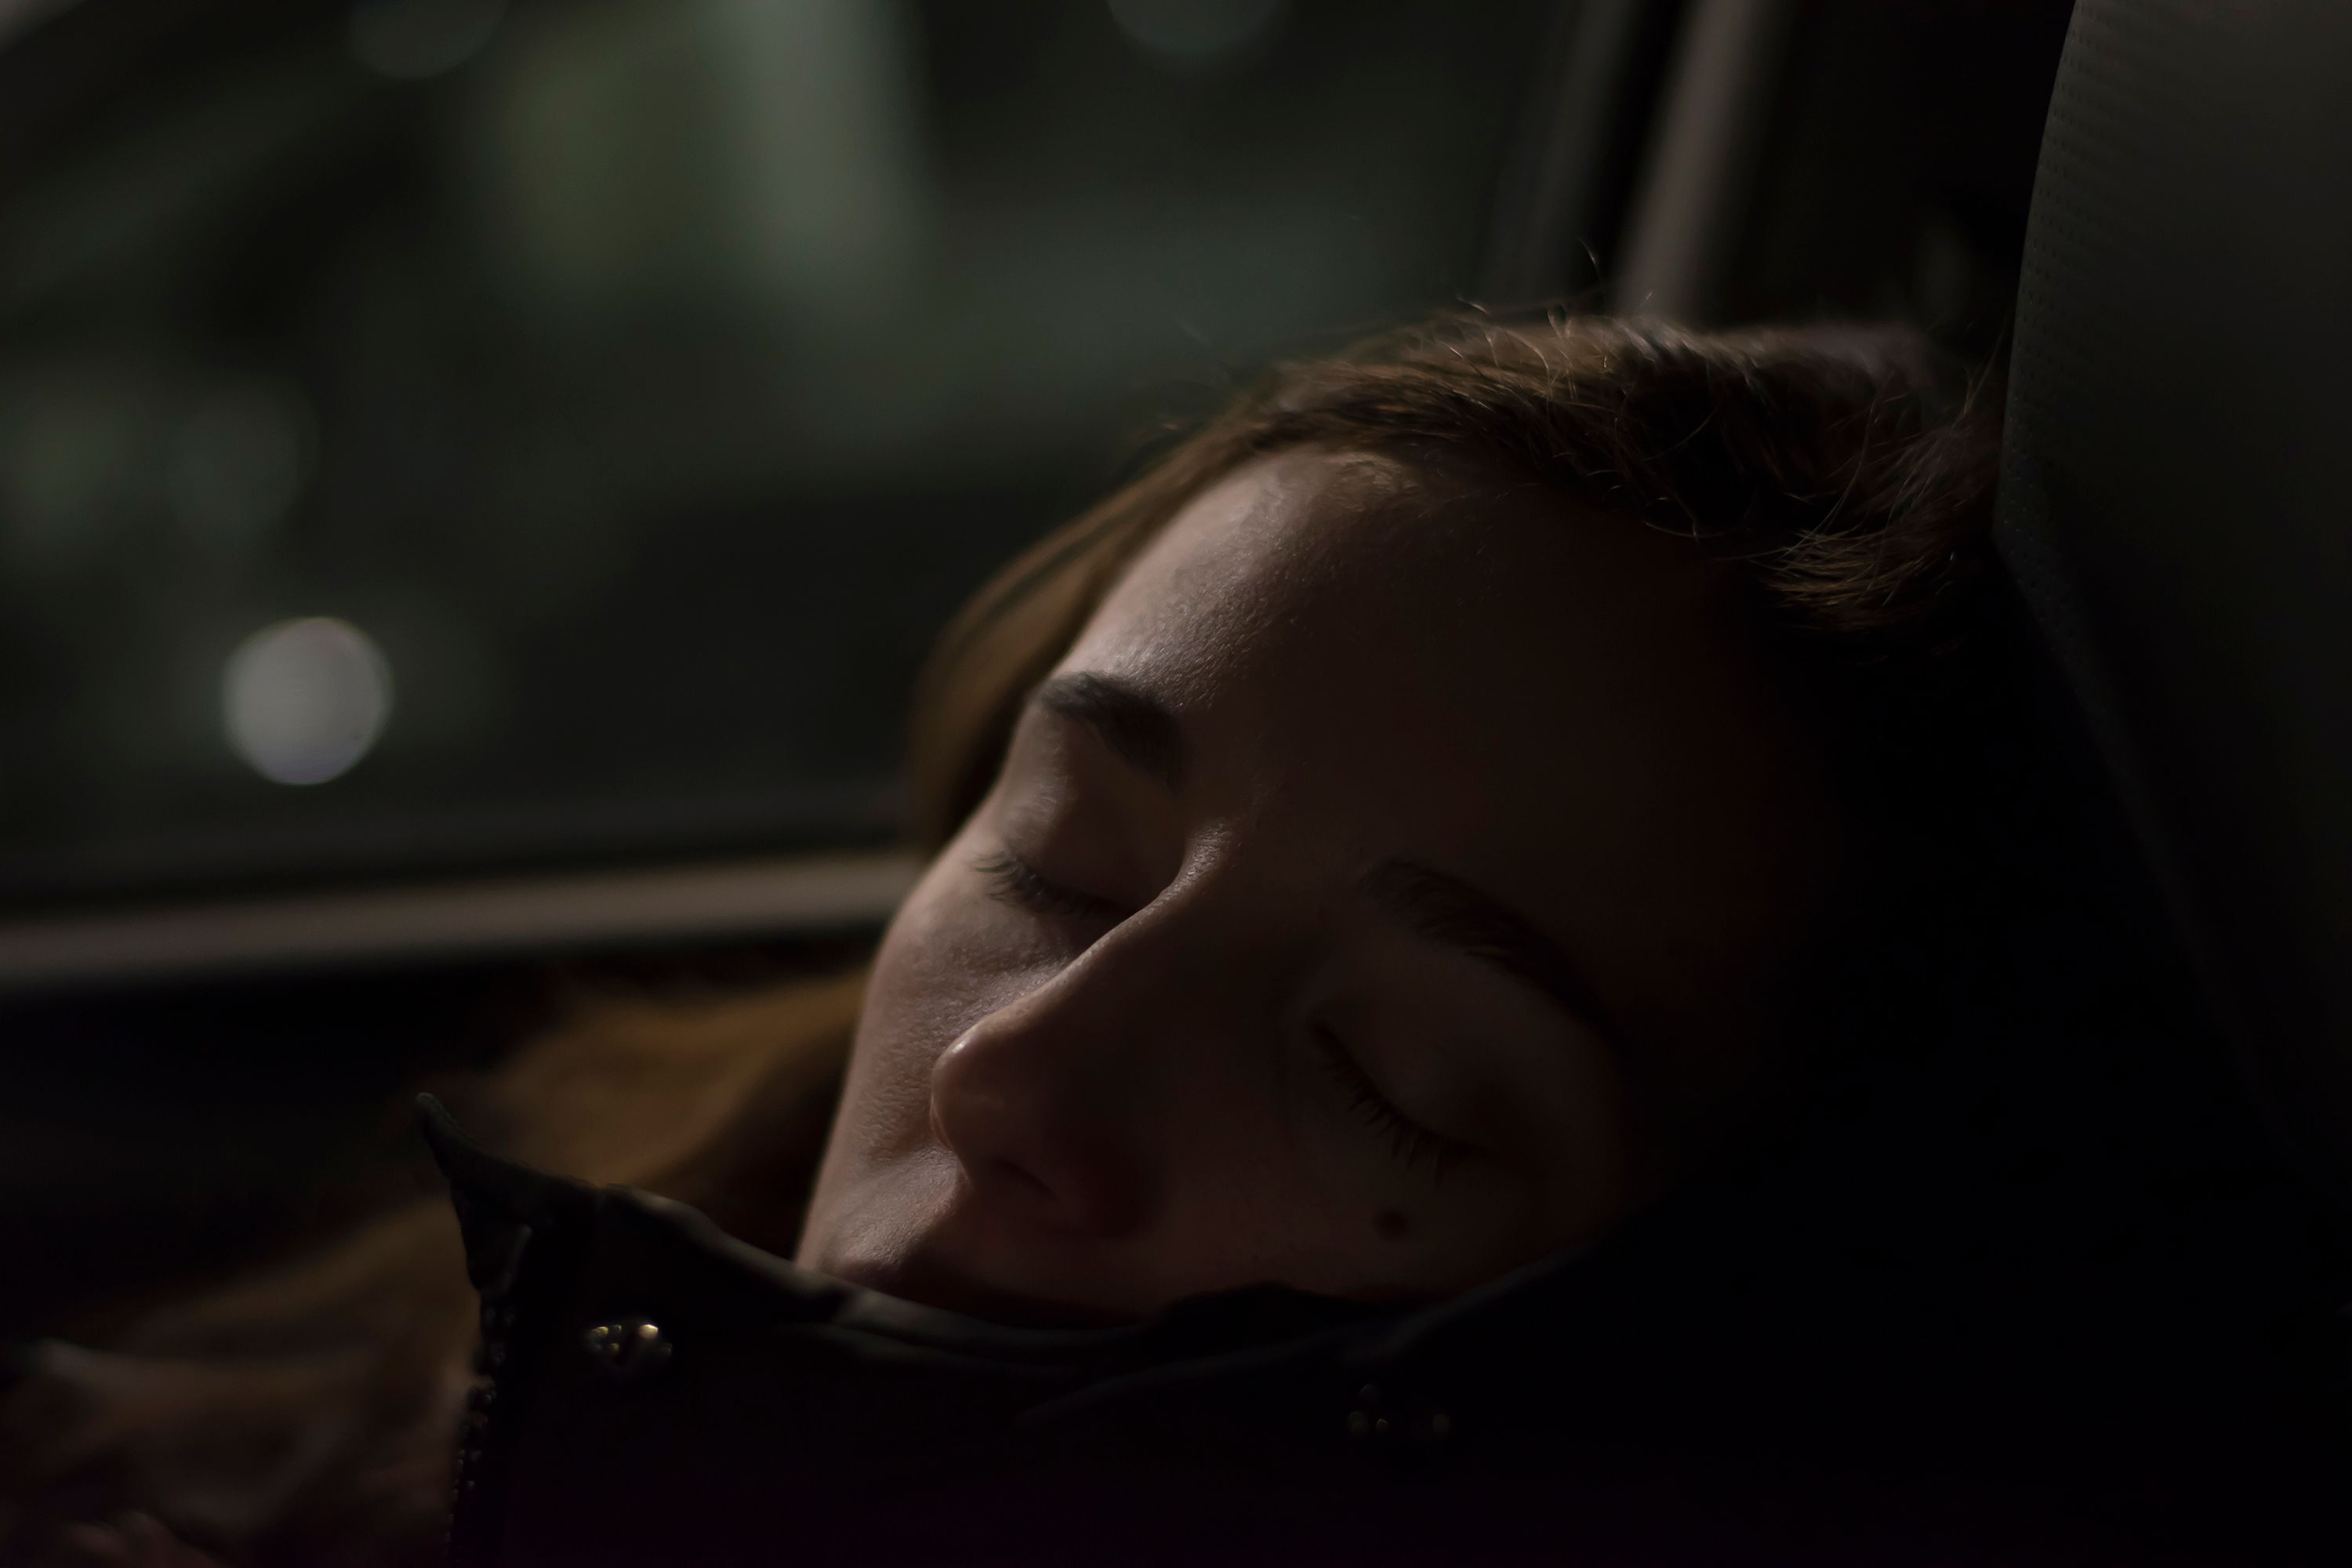 Attractive lady sleeping on passenger seat in the car | Source: Shutterstock.com